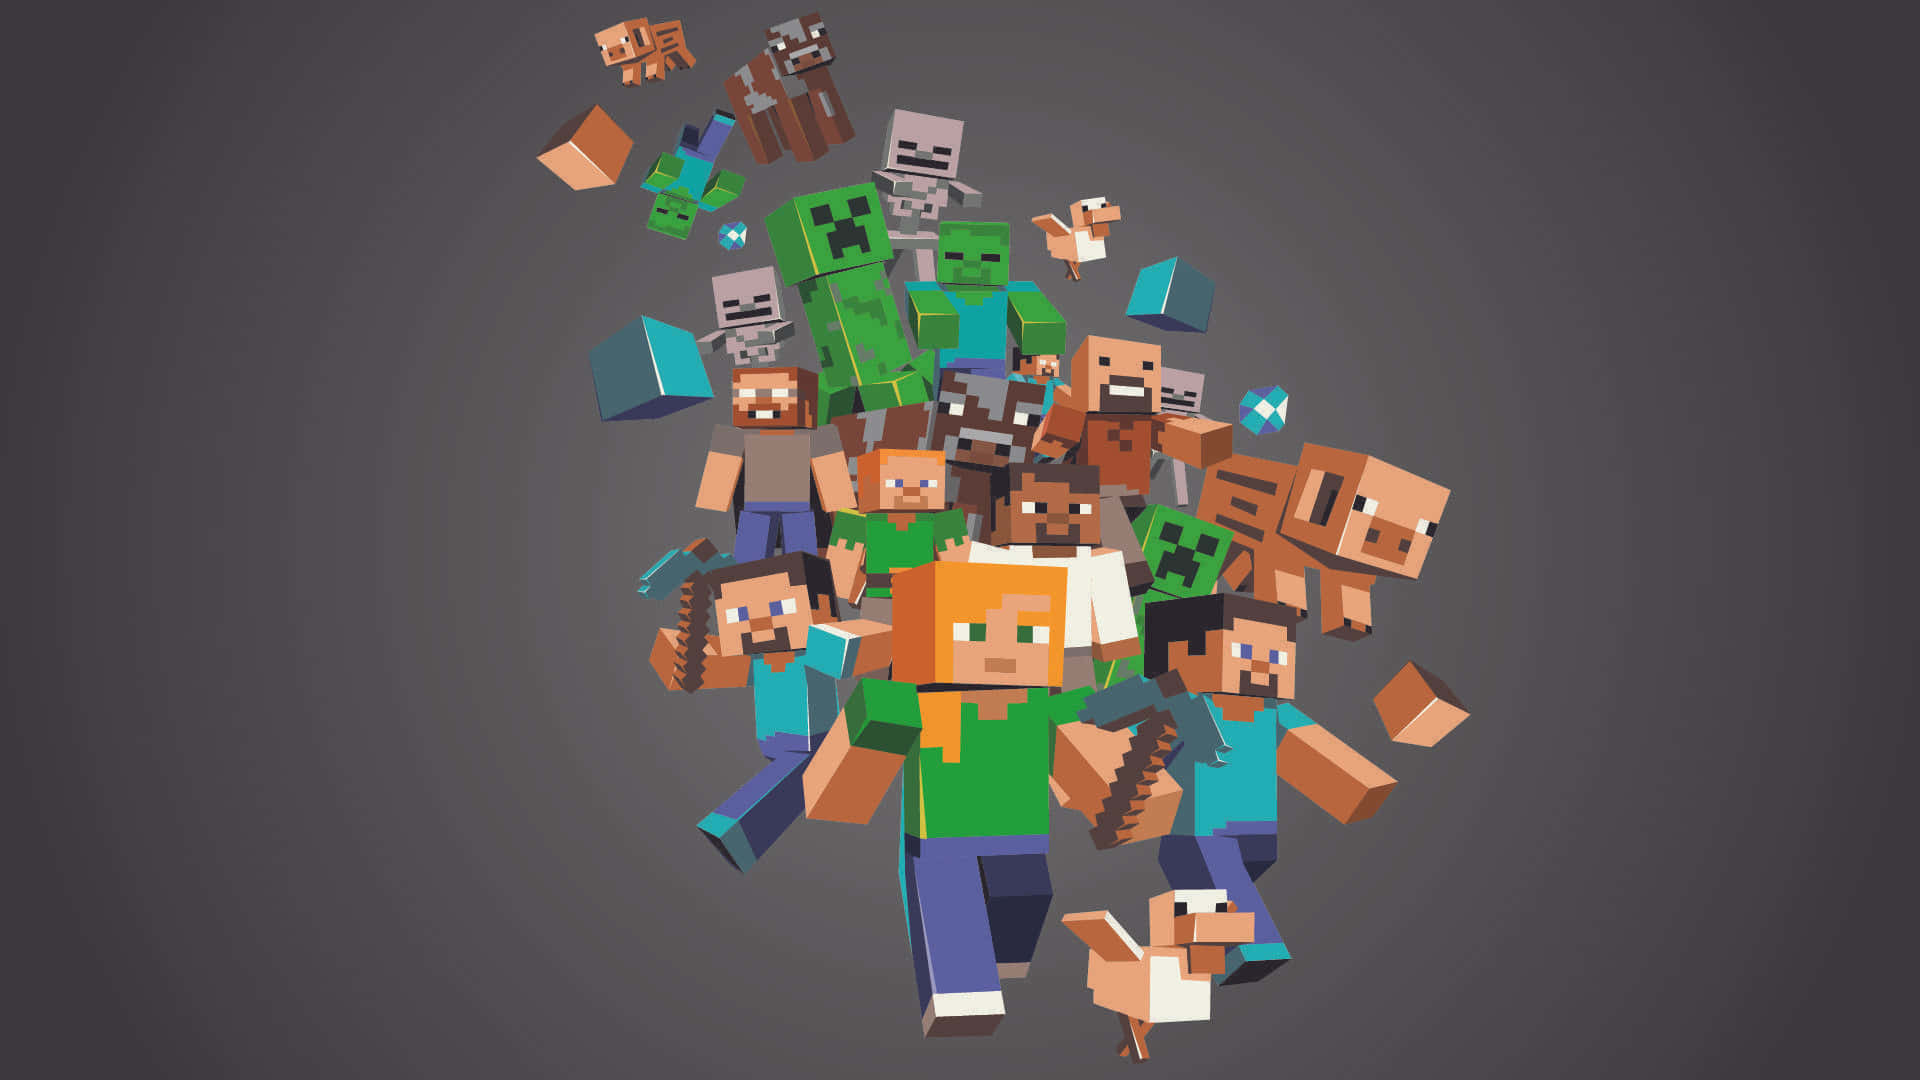 Play any Minecraft with these Awesome Cool Skins!